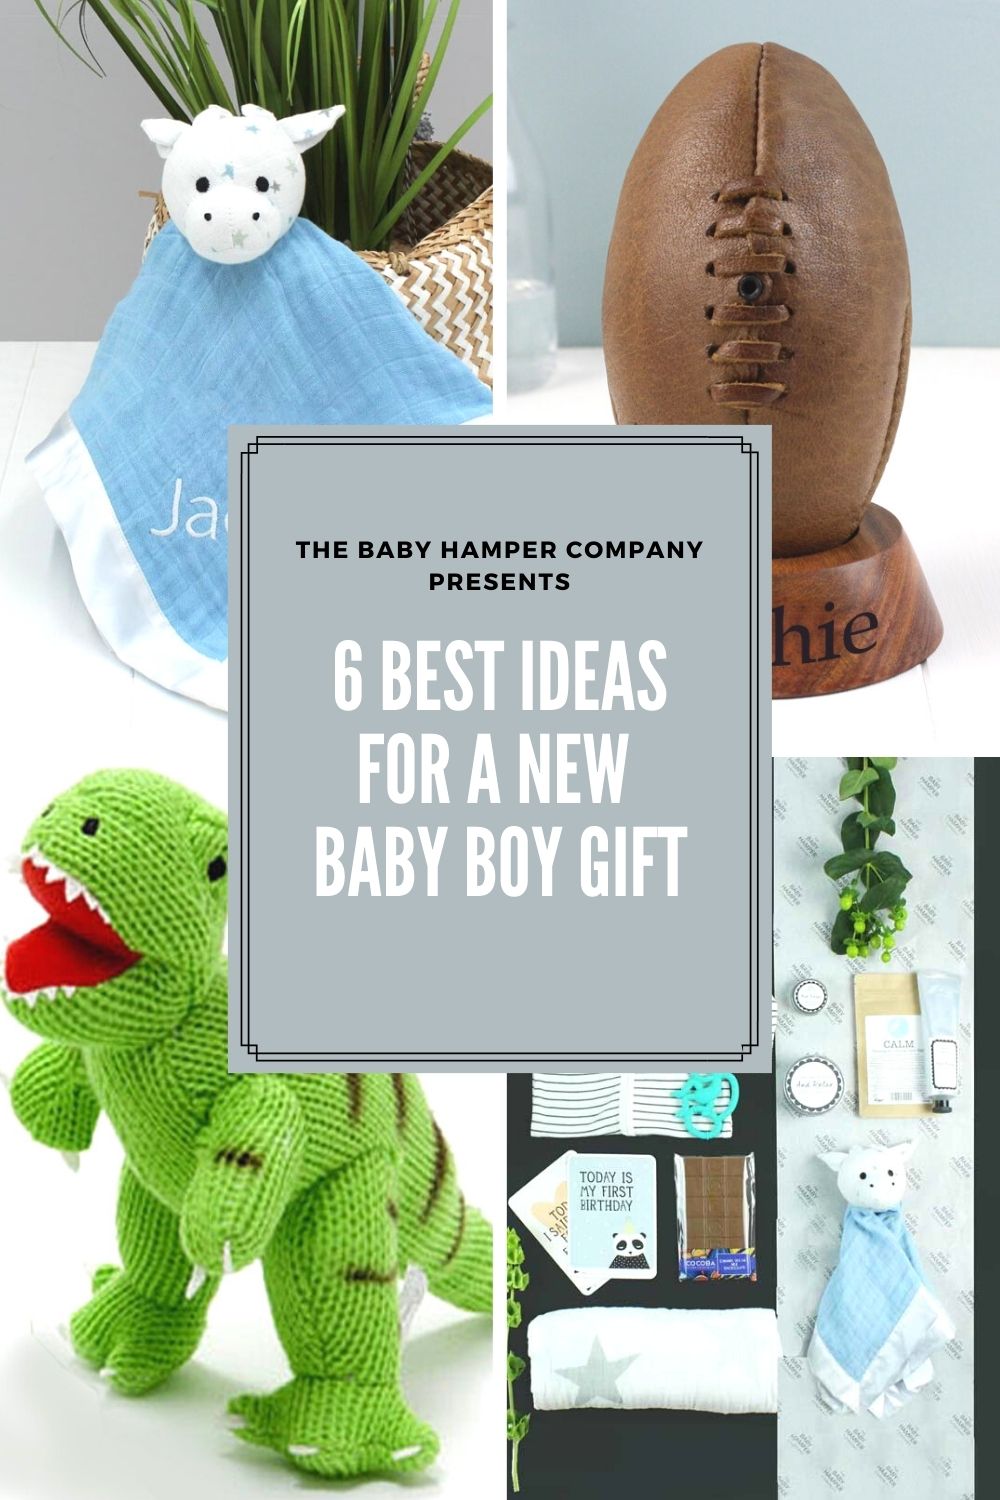 6 Best Ideas for a New Baby Boy Gift